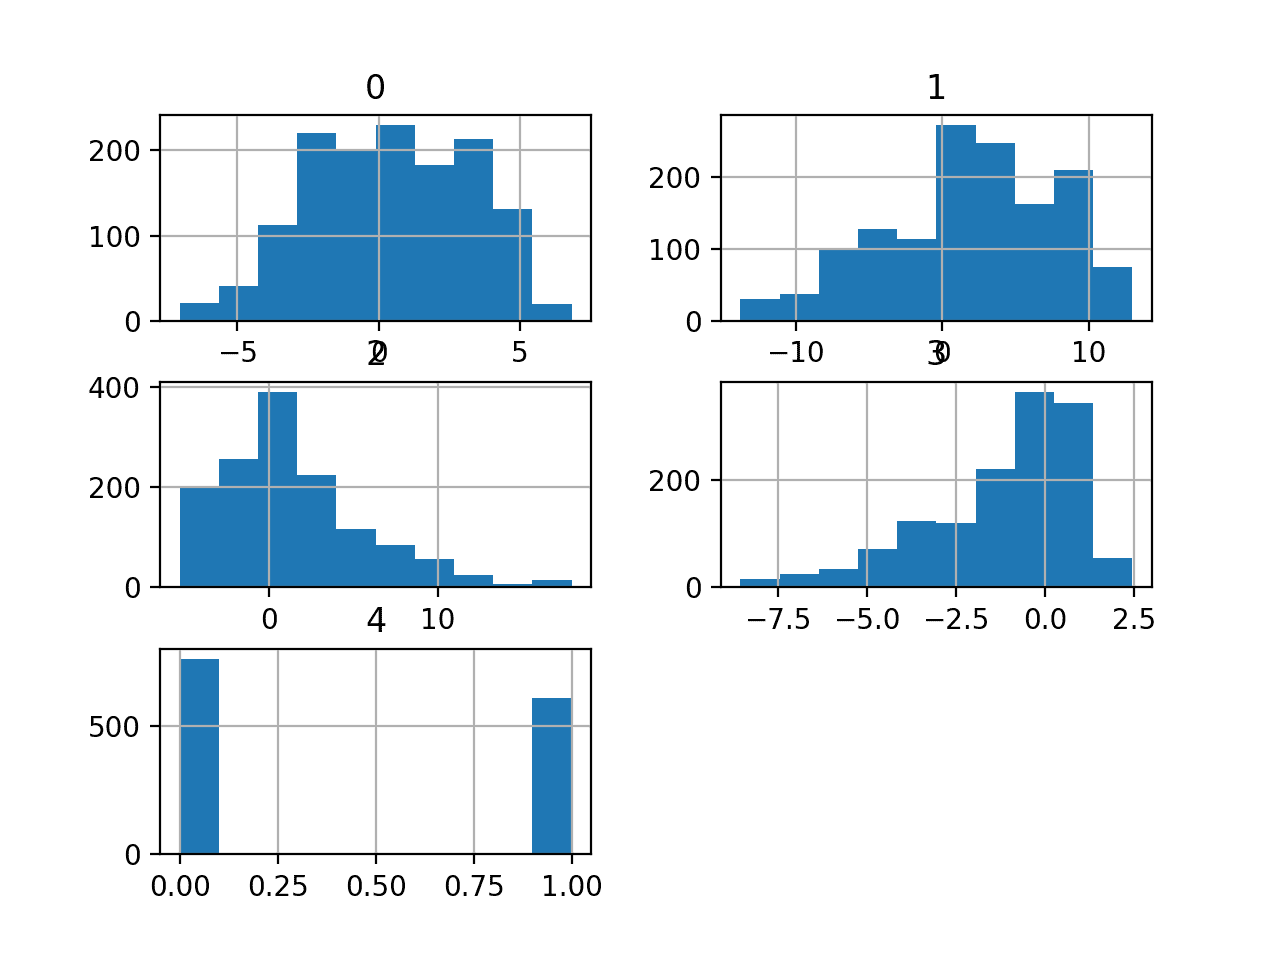 Histograms of the Skins Nomenclature Dataset